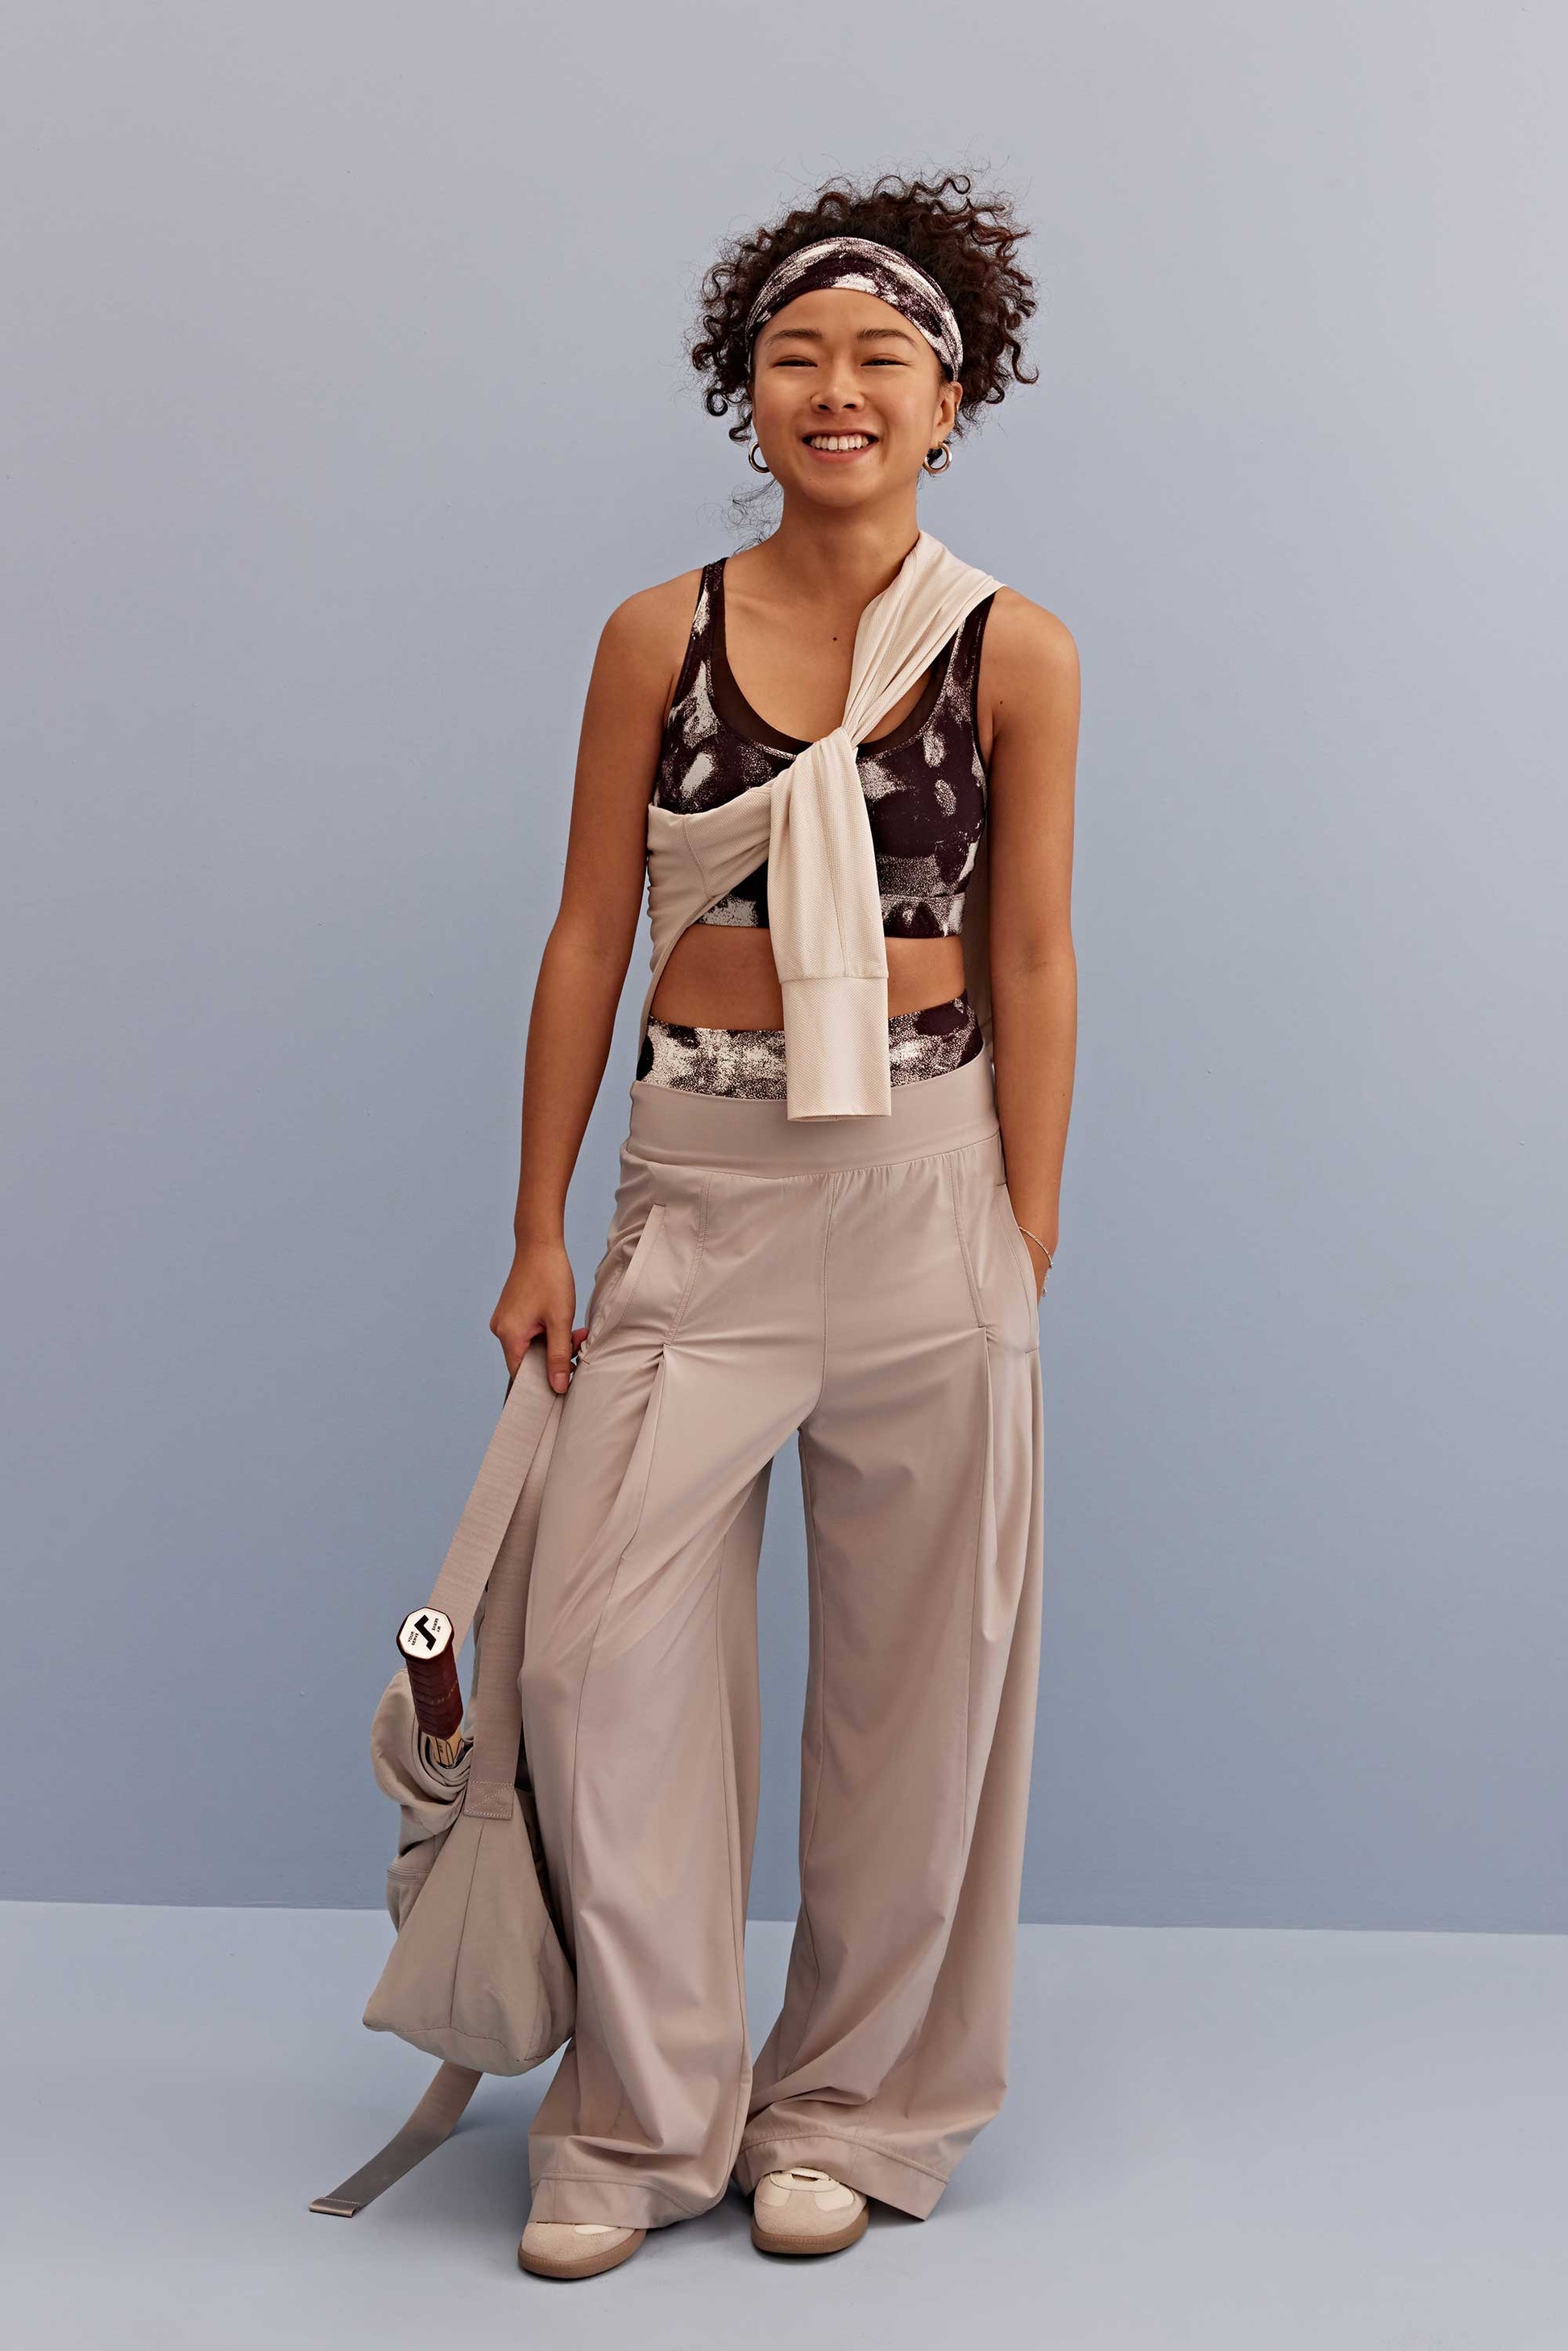 a woman wearing a metallic sports bra and headband, pair with a light beige pants and shoes. holding a light beige bag